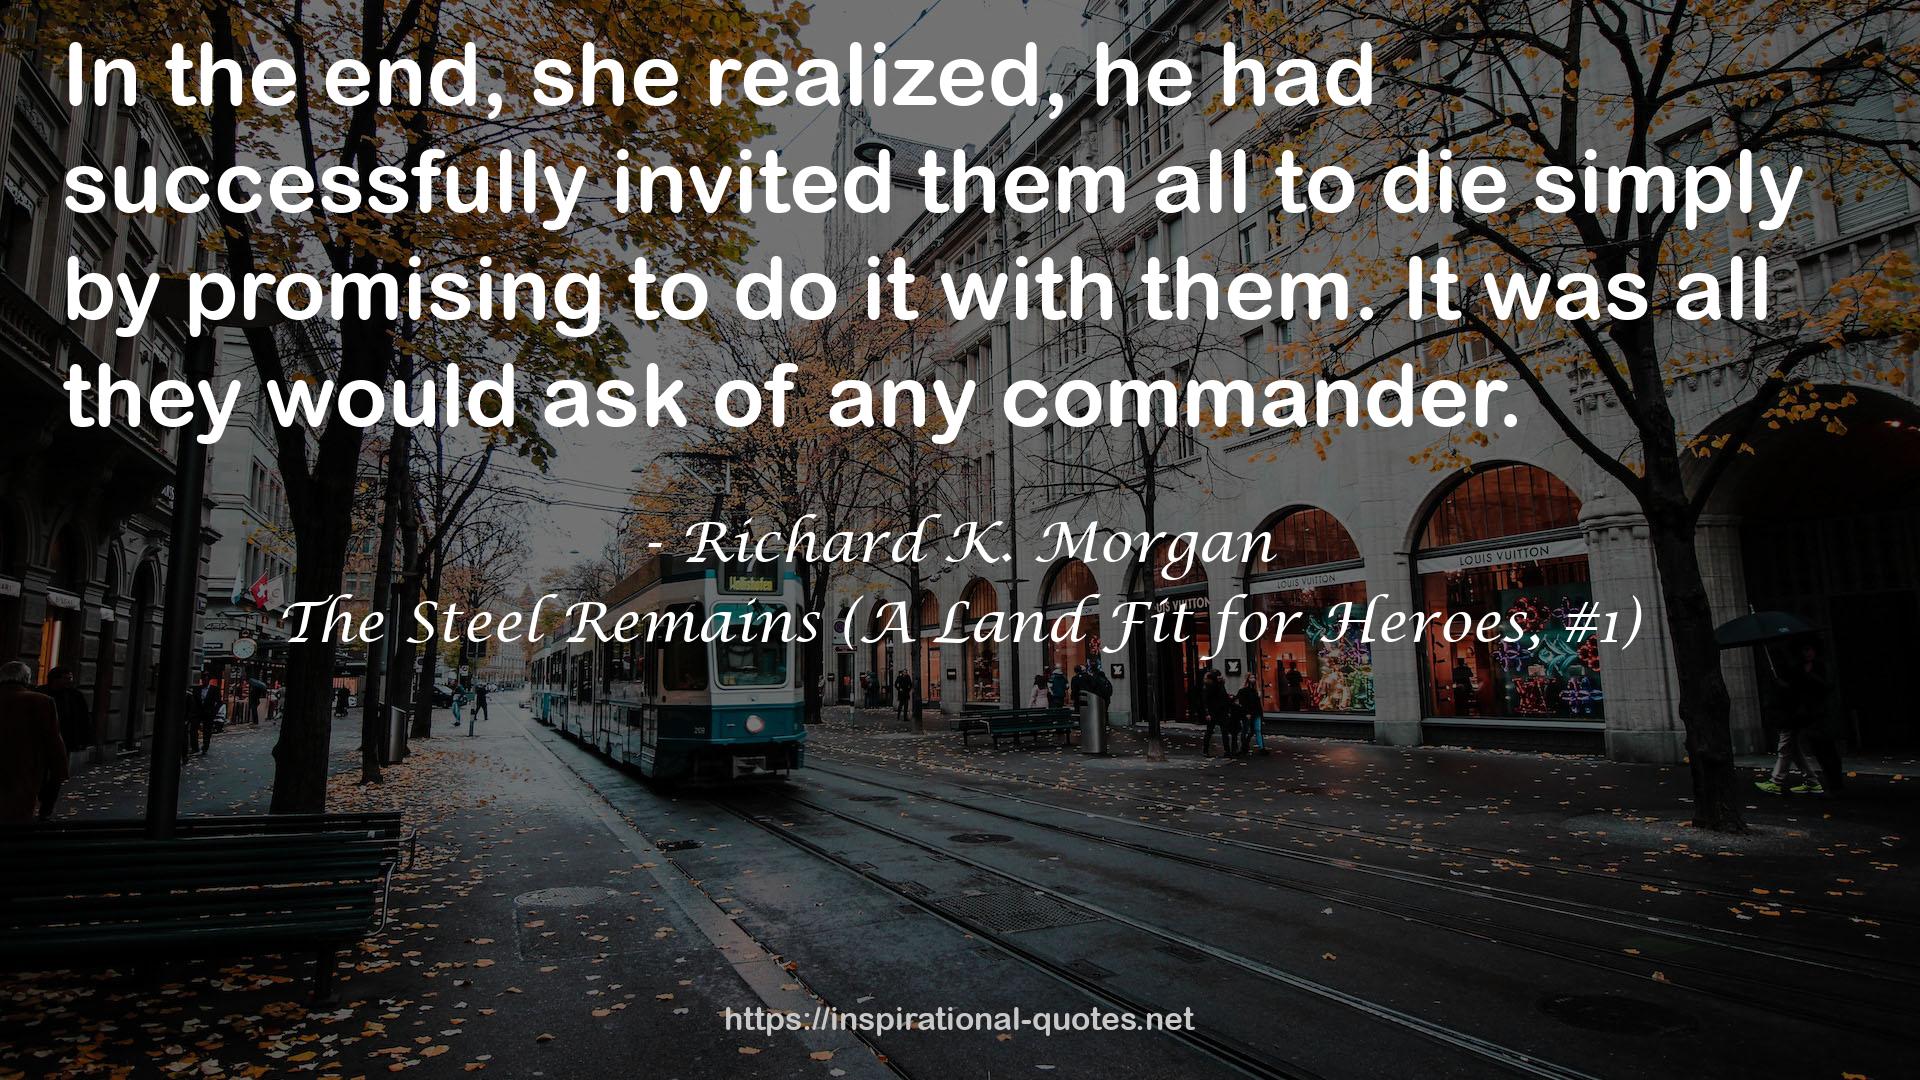 The Steel Remains (A Land Fit for Heroes, #1) QUOTES